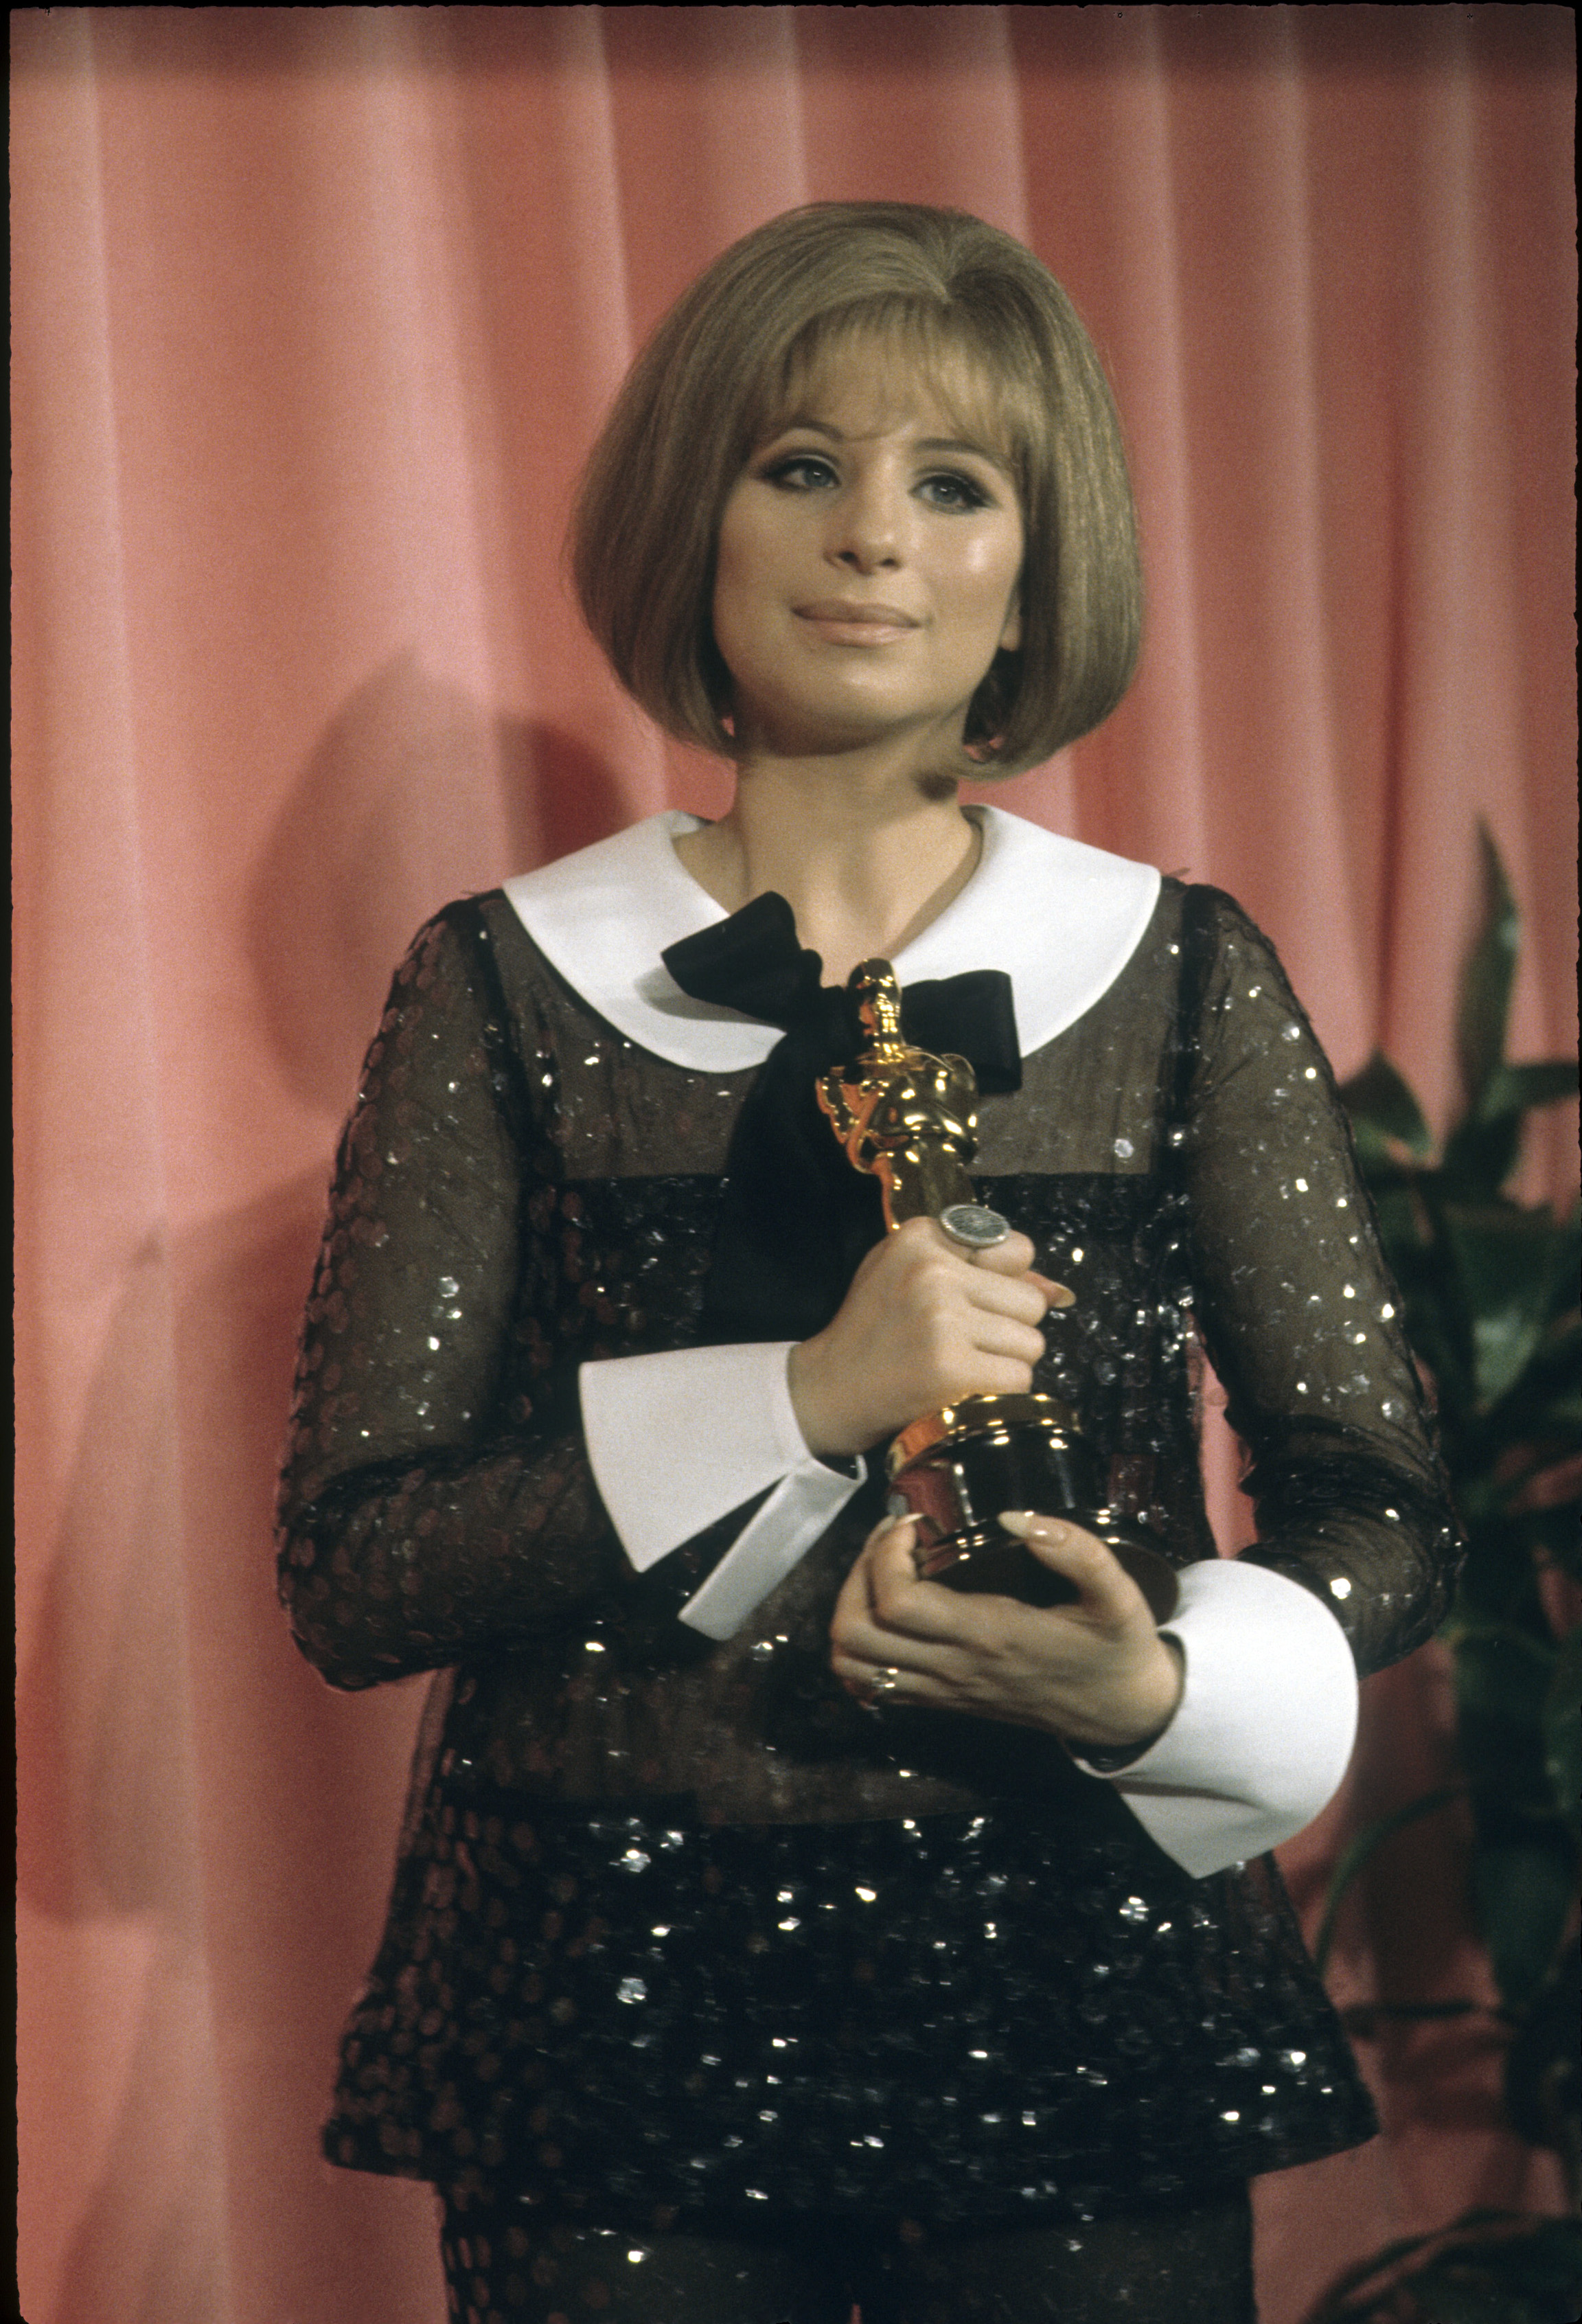 Barbara Streisand after receiving an Academy Award on April 14, 1969 | Source: Getty Images